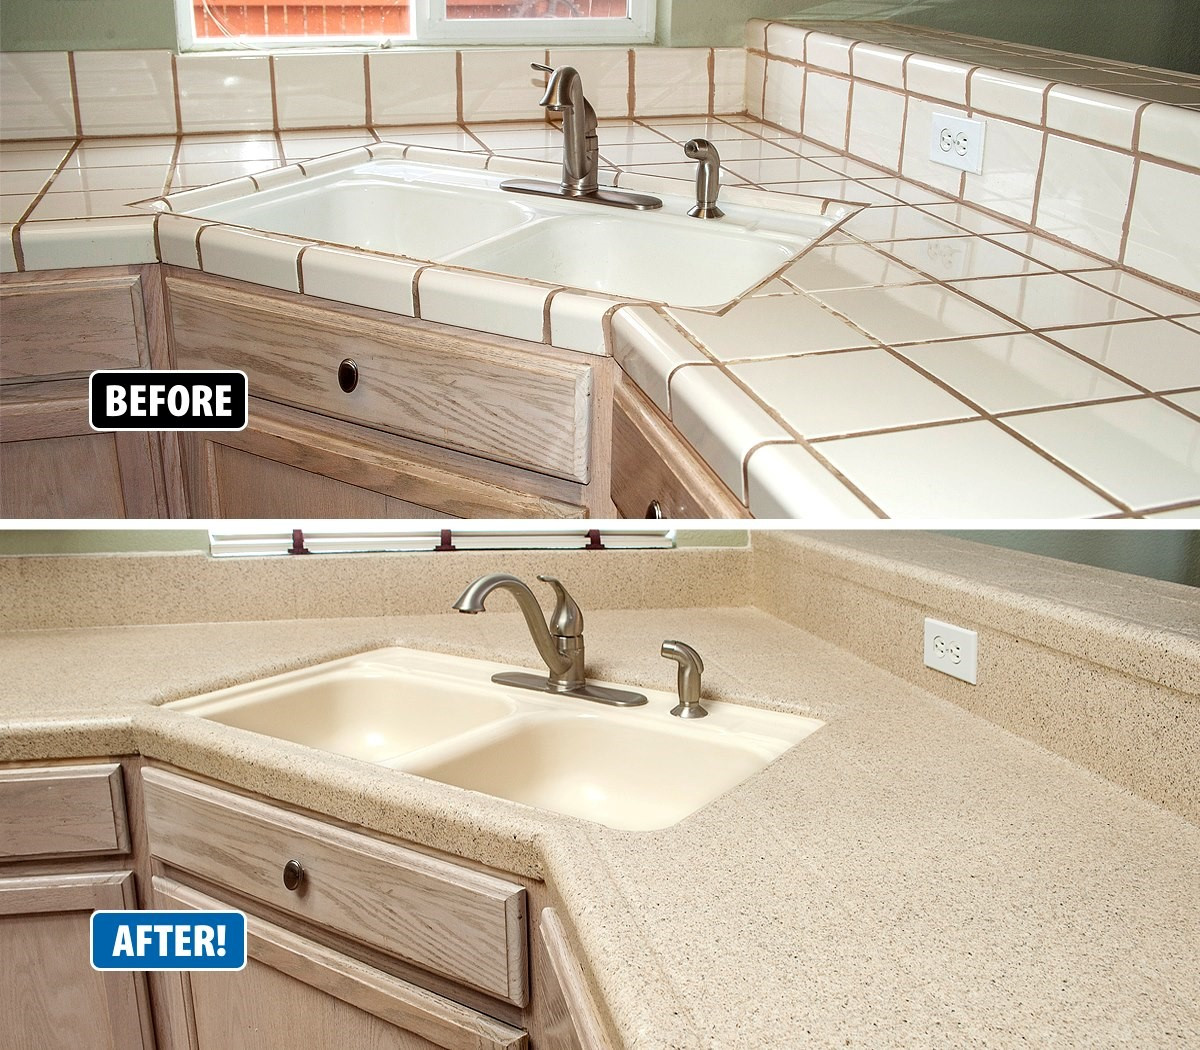 Kitchen Countertop Refinishing
 Countertop Refinishing Revitalizes Outdated Kitchens